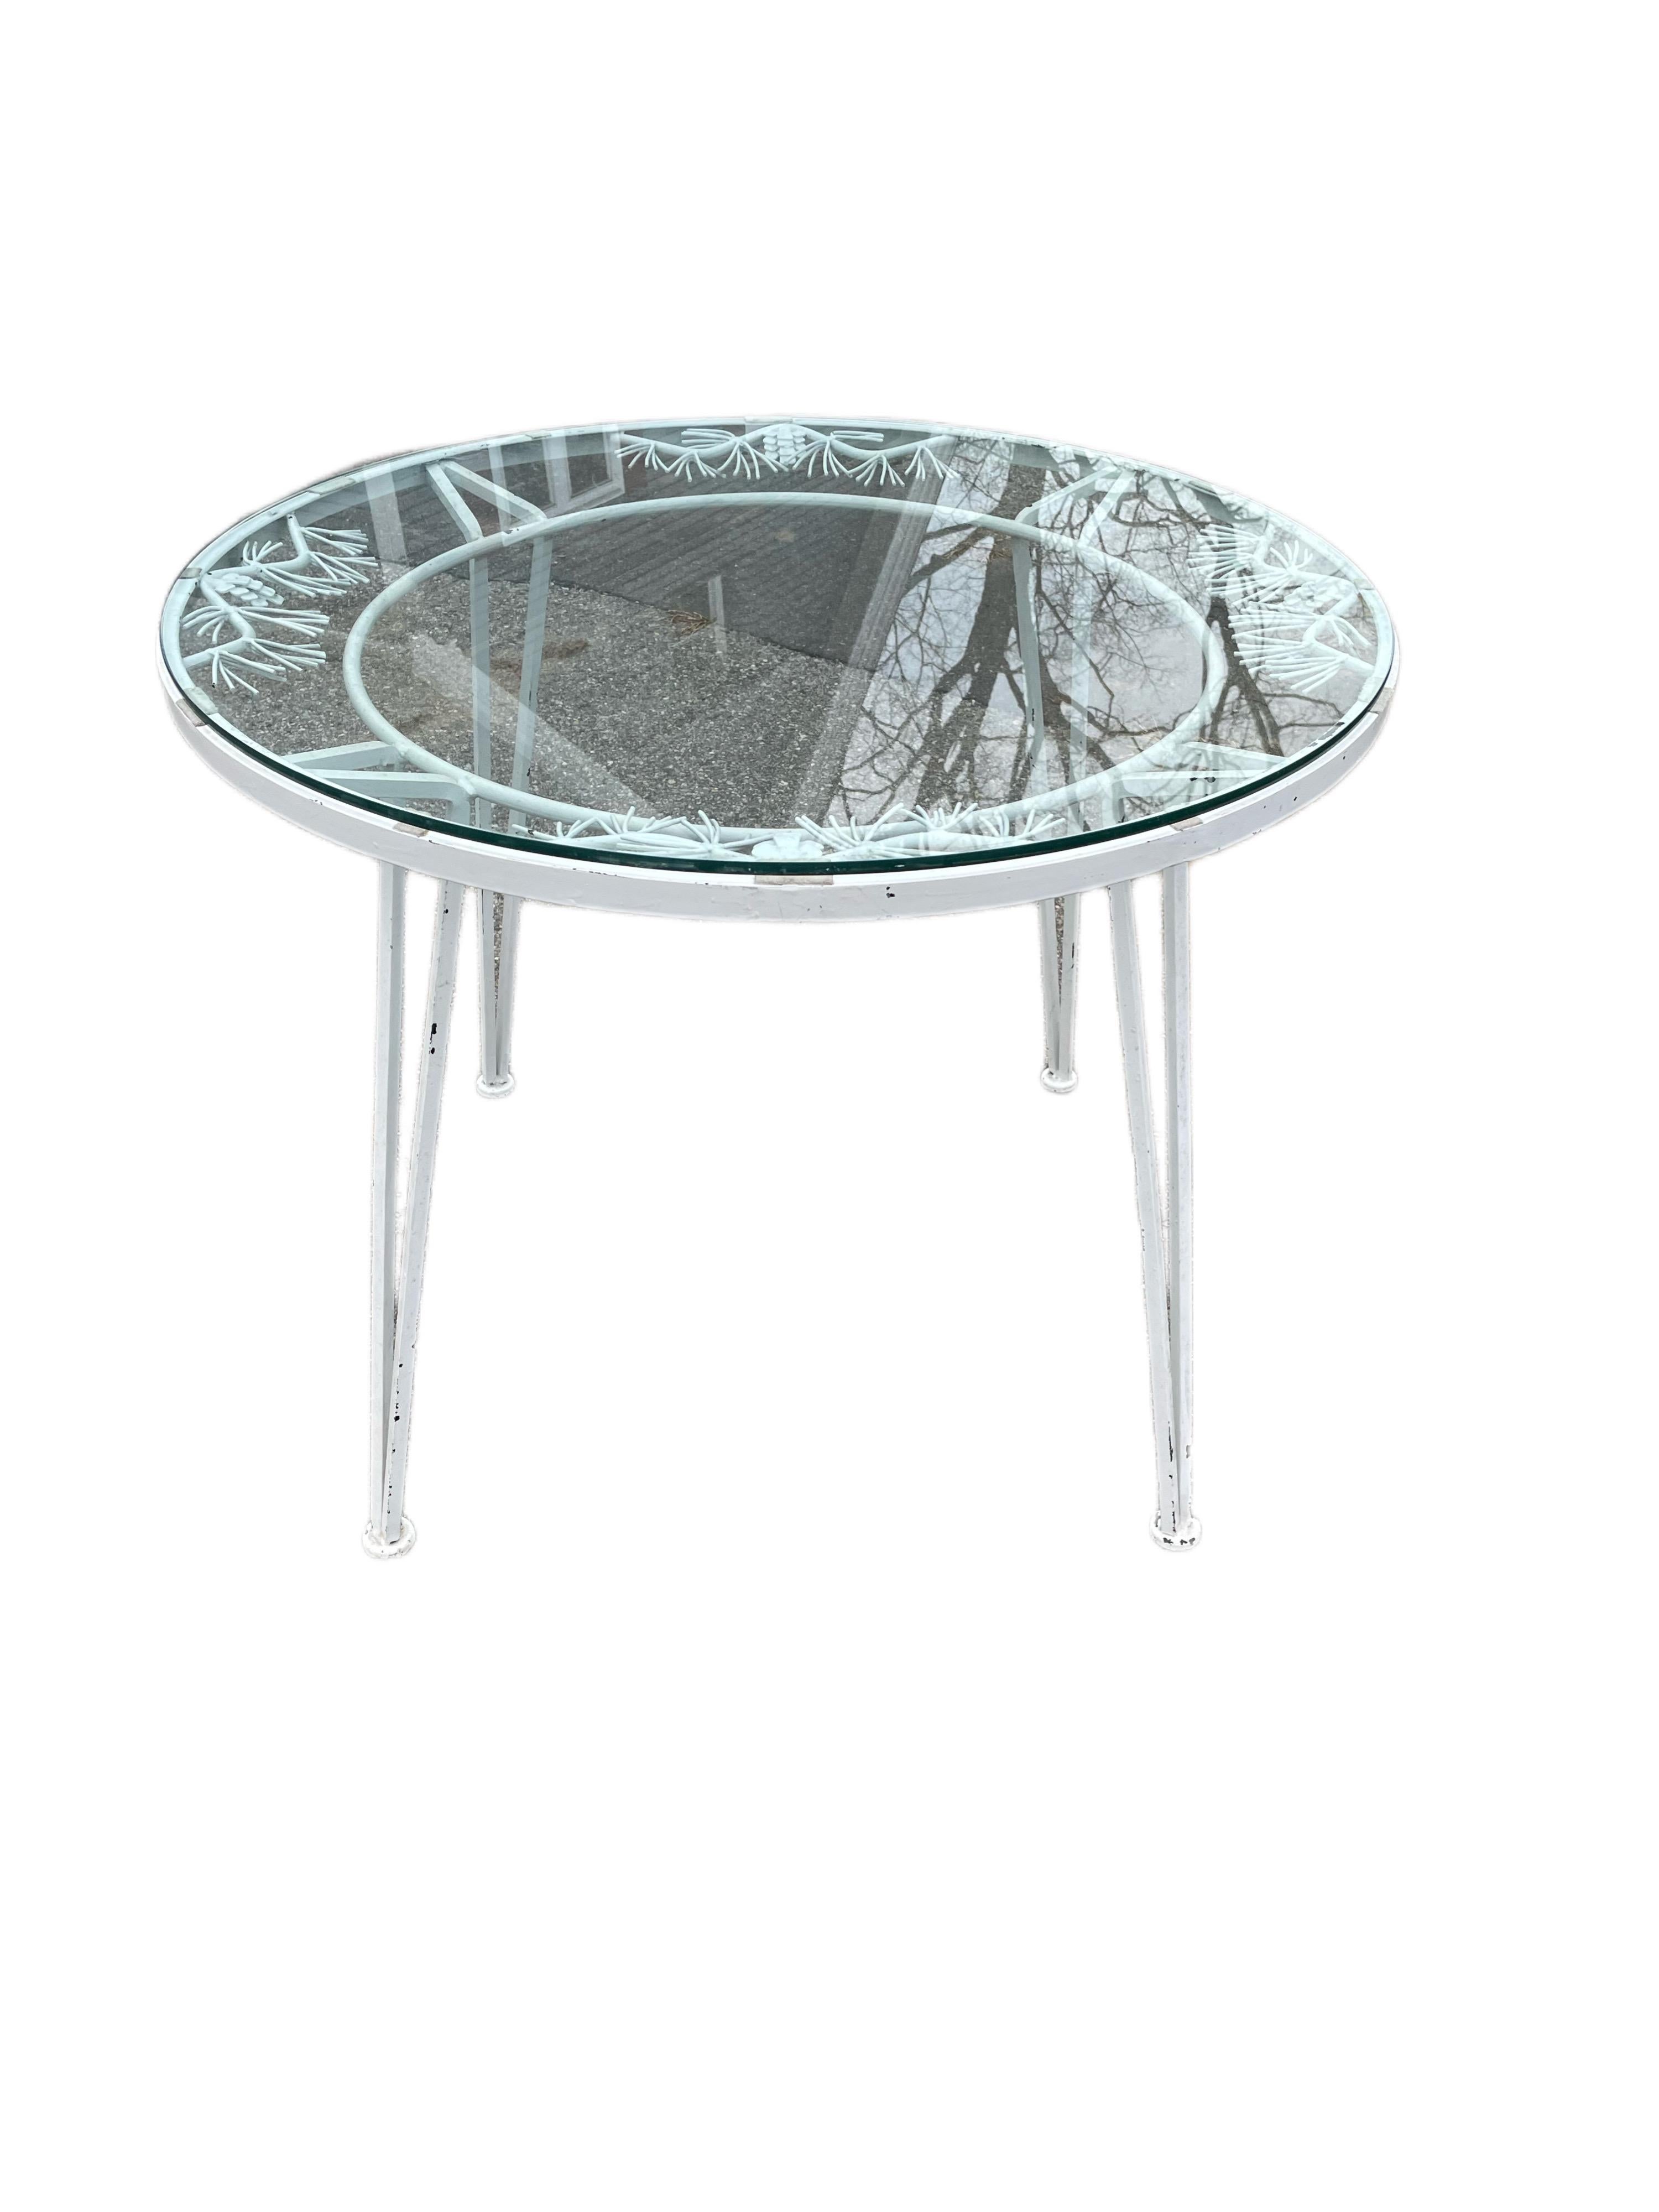 ikea round glass dining table